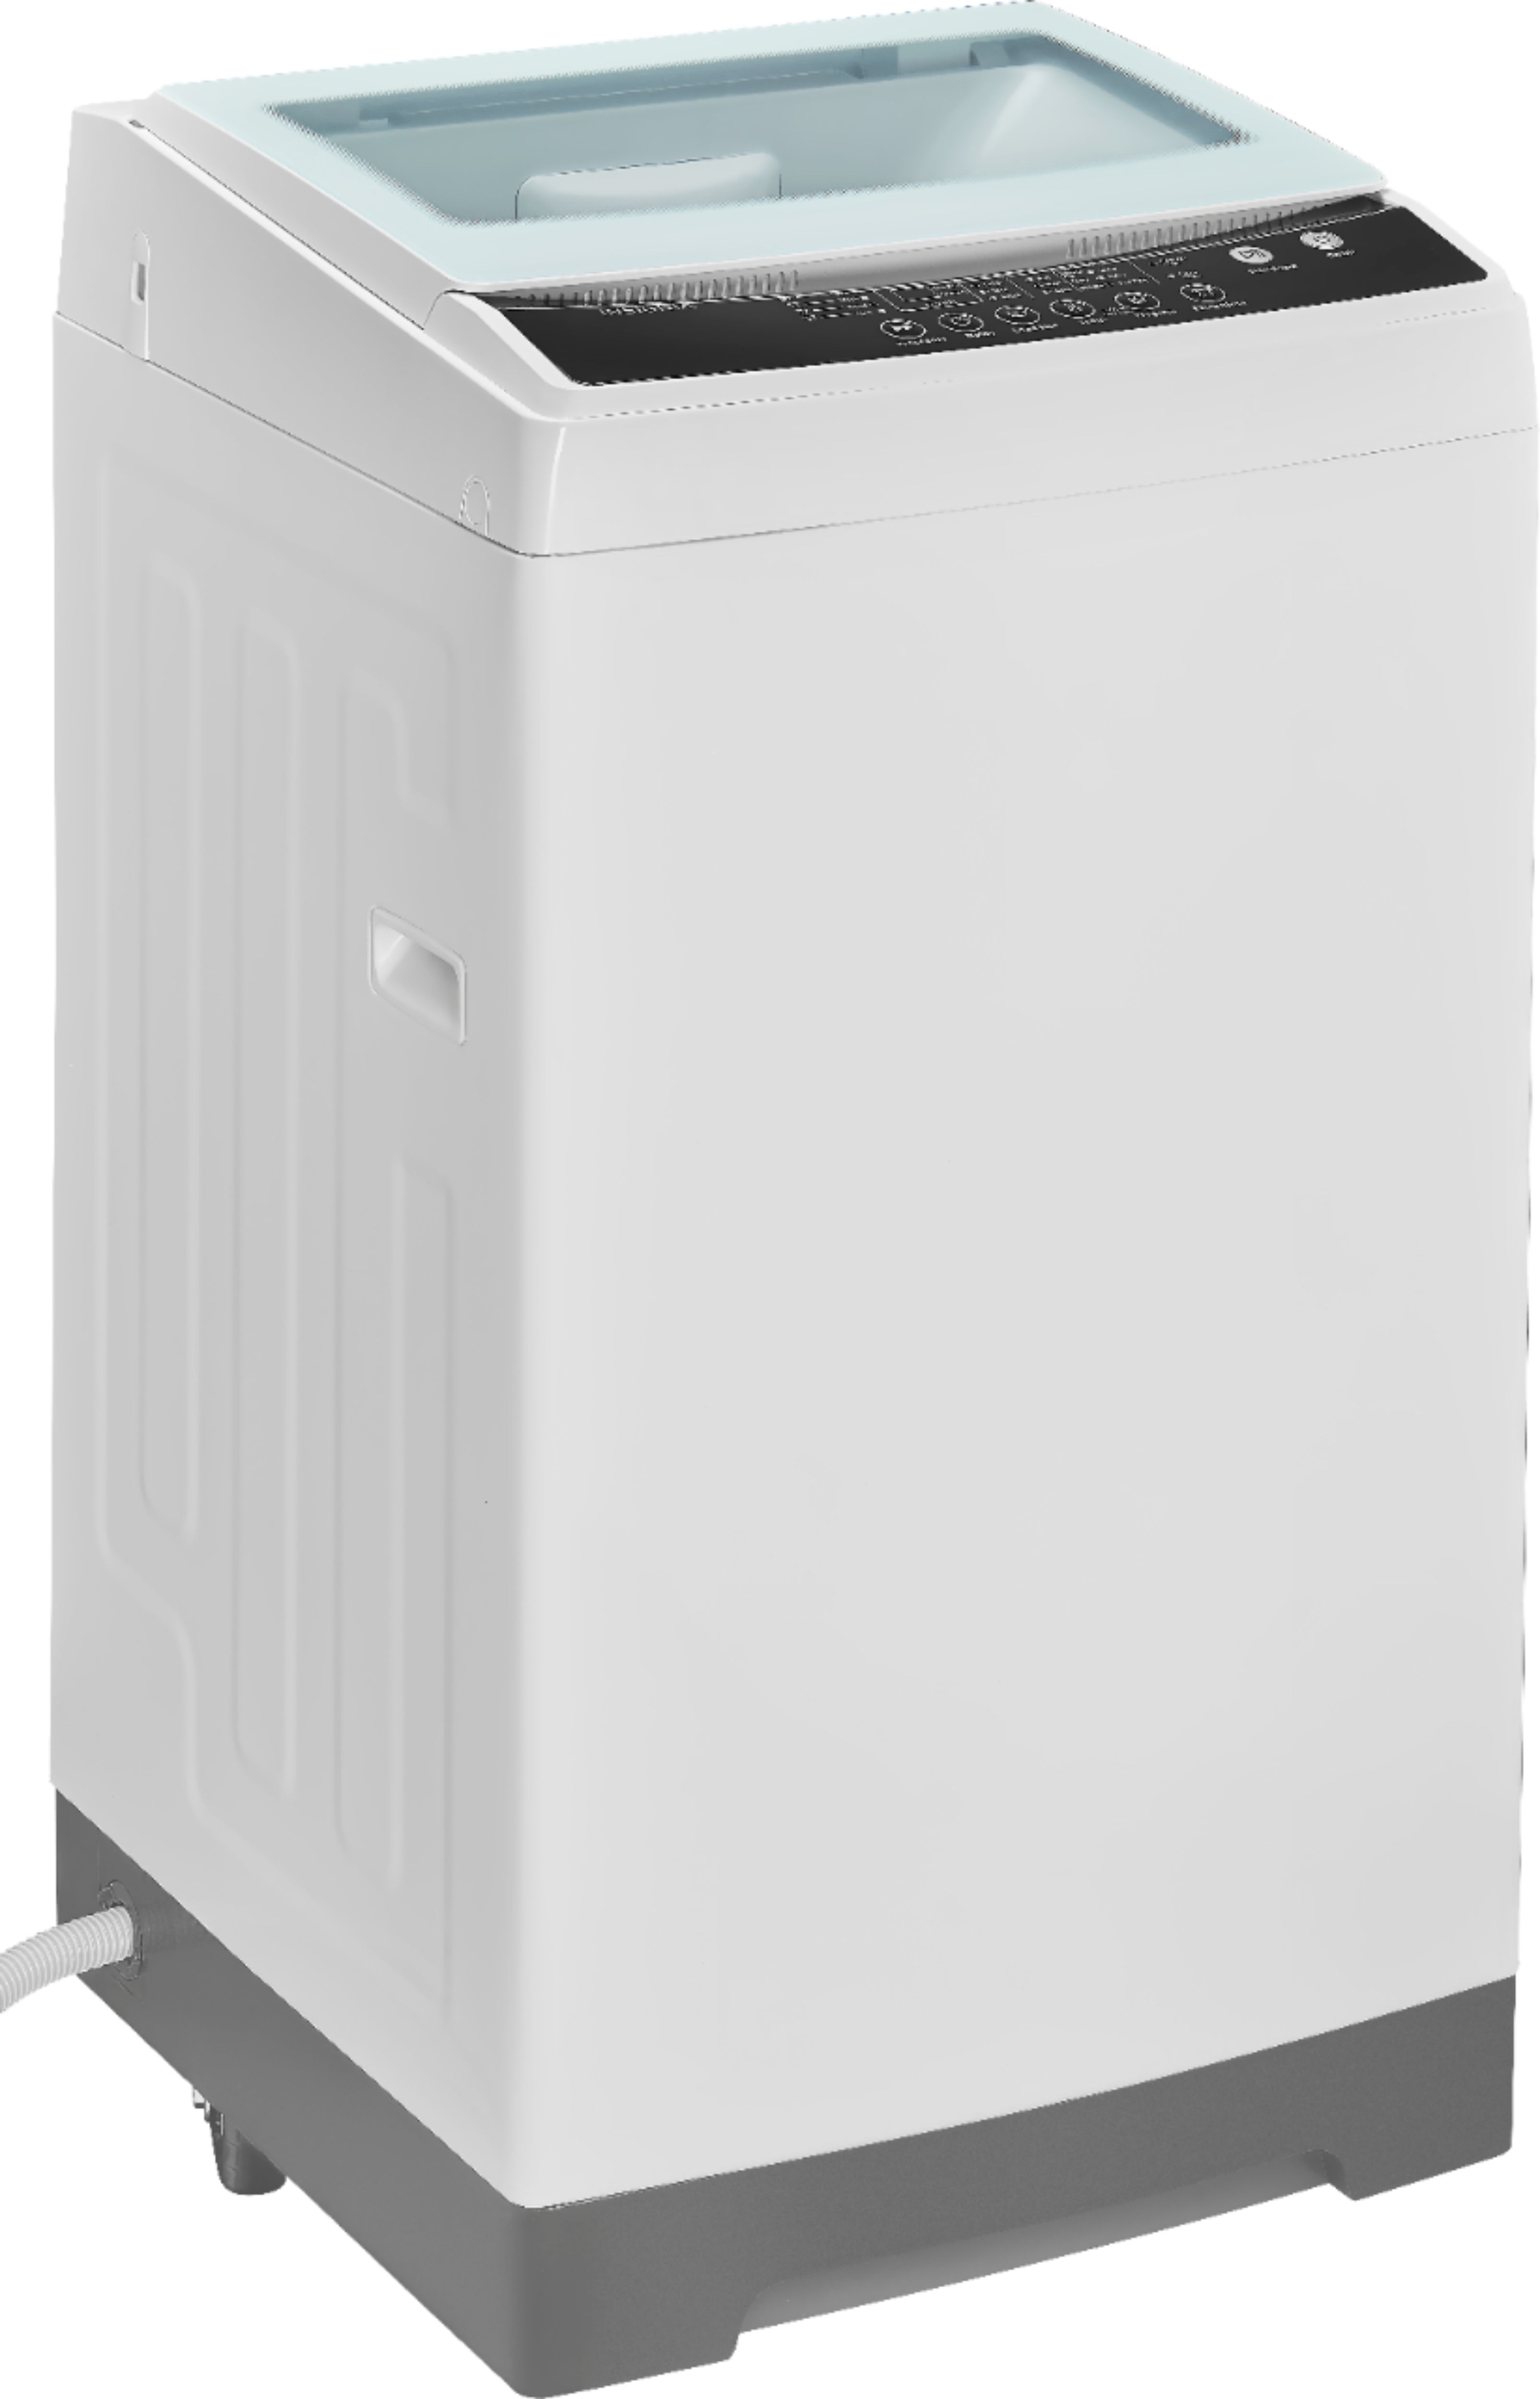 Angle View: GE - 4.9 Cu. Ft. 13-Cycle Top-Loading Washer - White On White/Silver